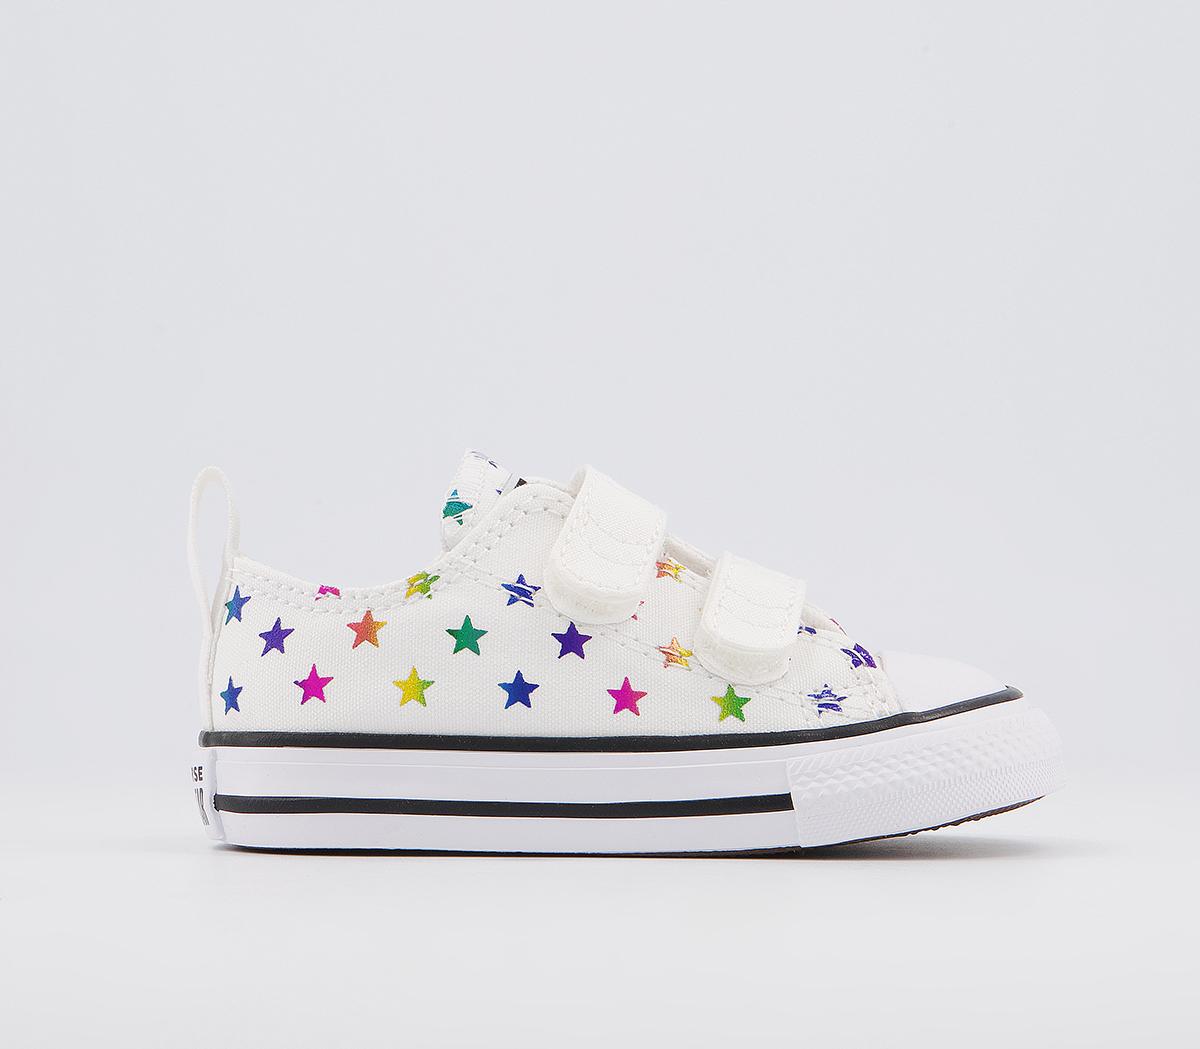 ConverseAll Star 2vlace TrainersWhite Black White Foil Stars